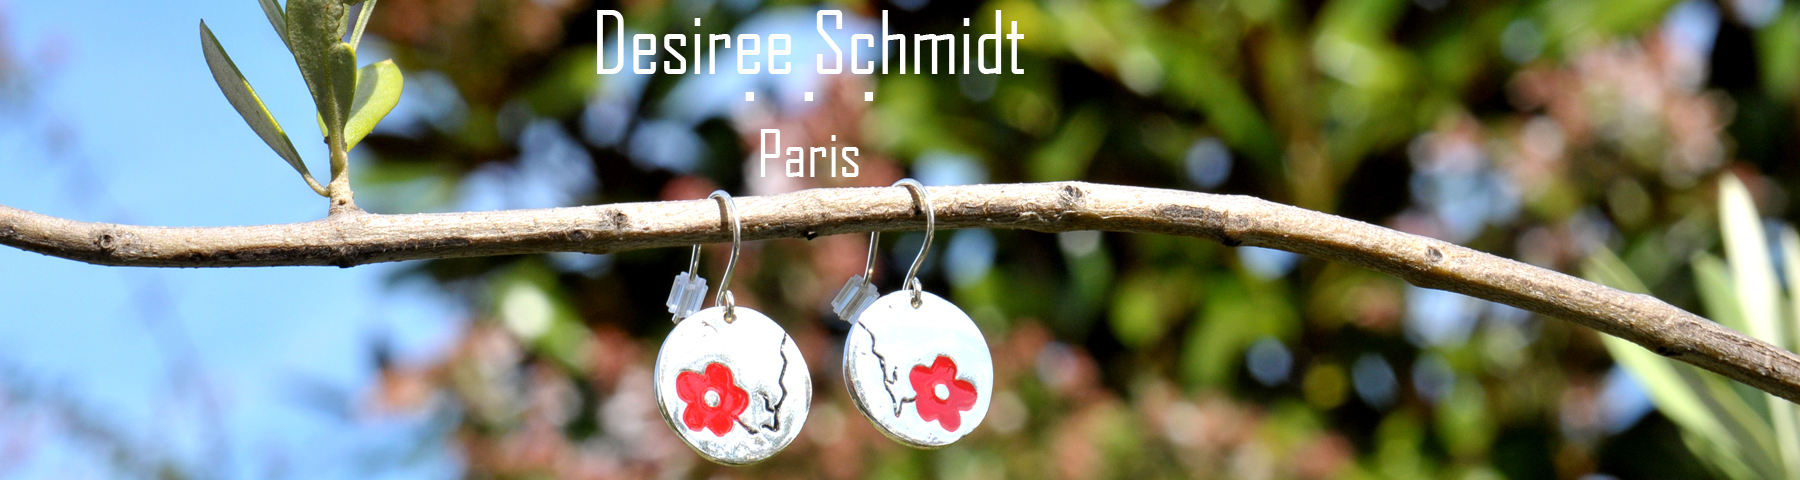 925 silver red Cherry Blossom earrings made in France